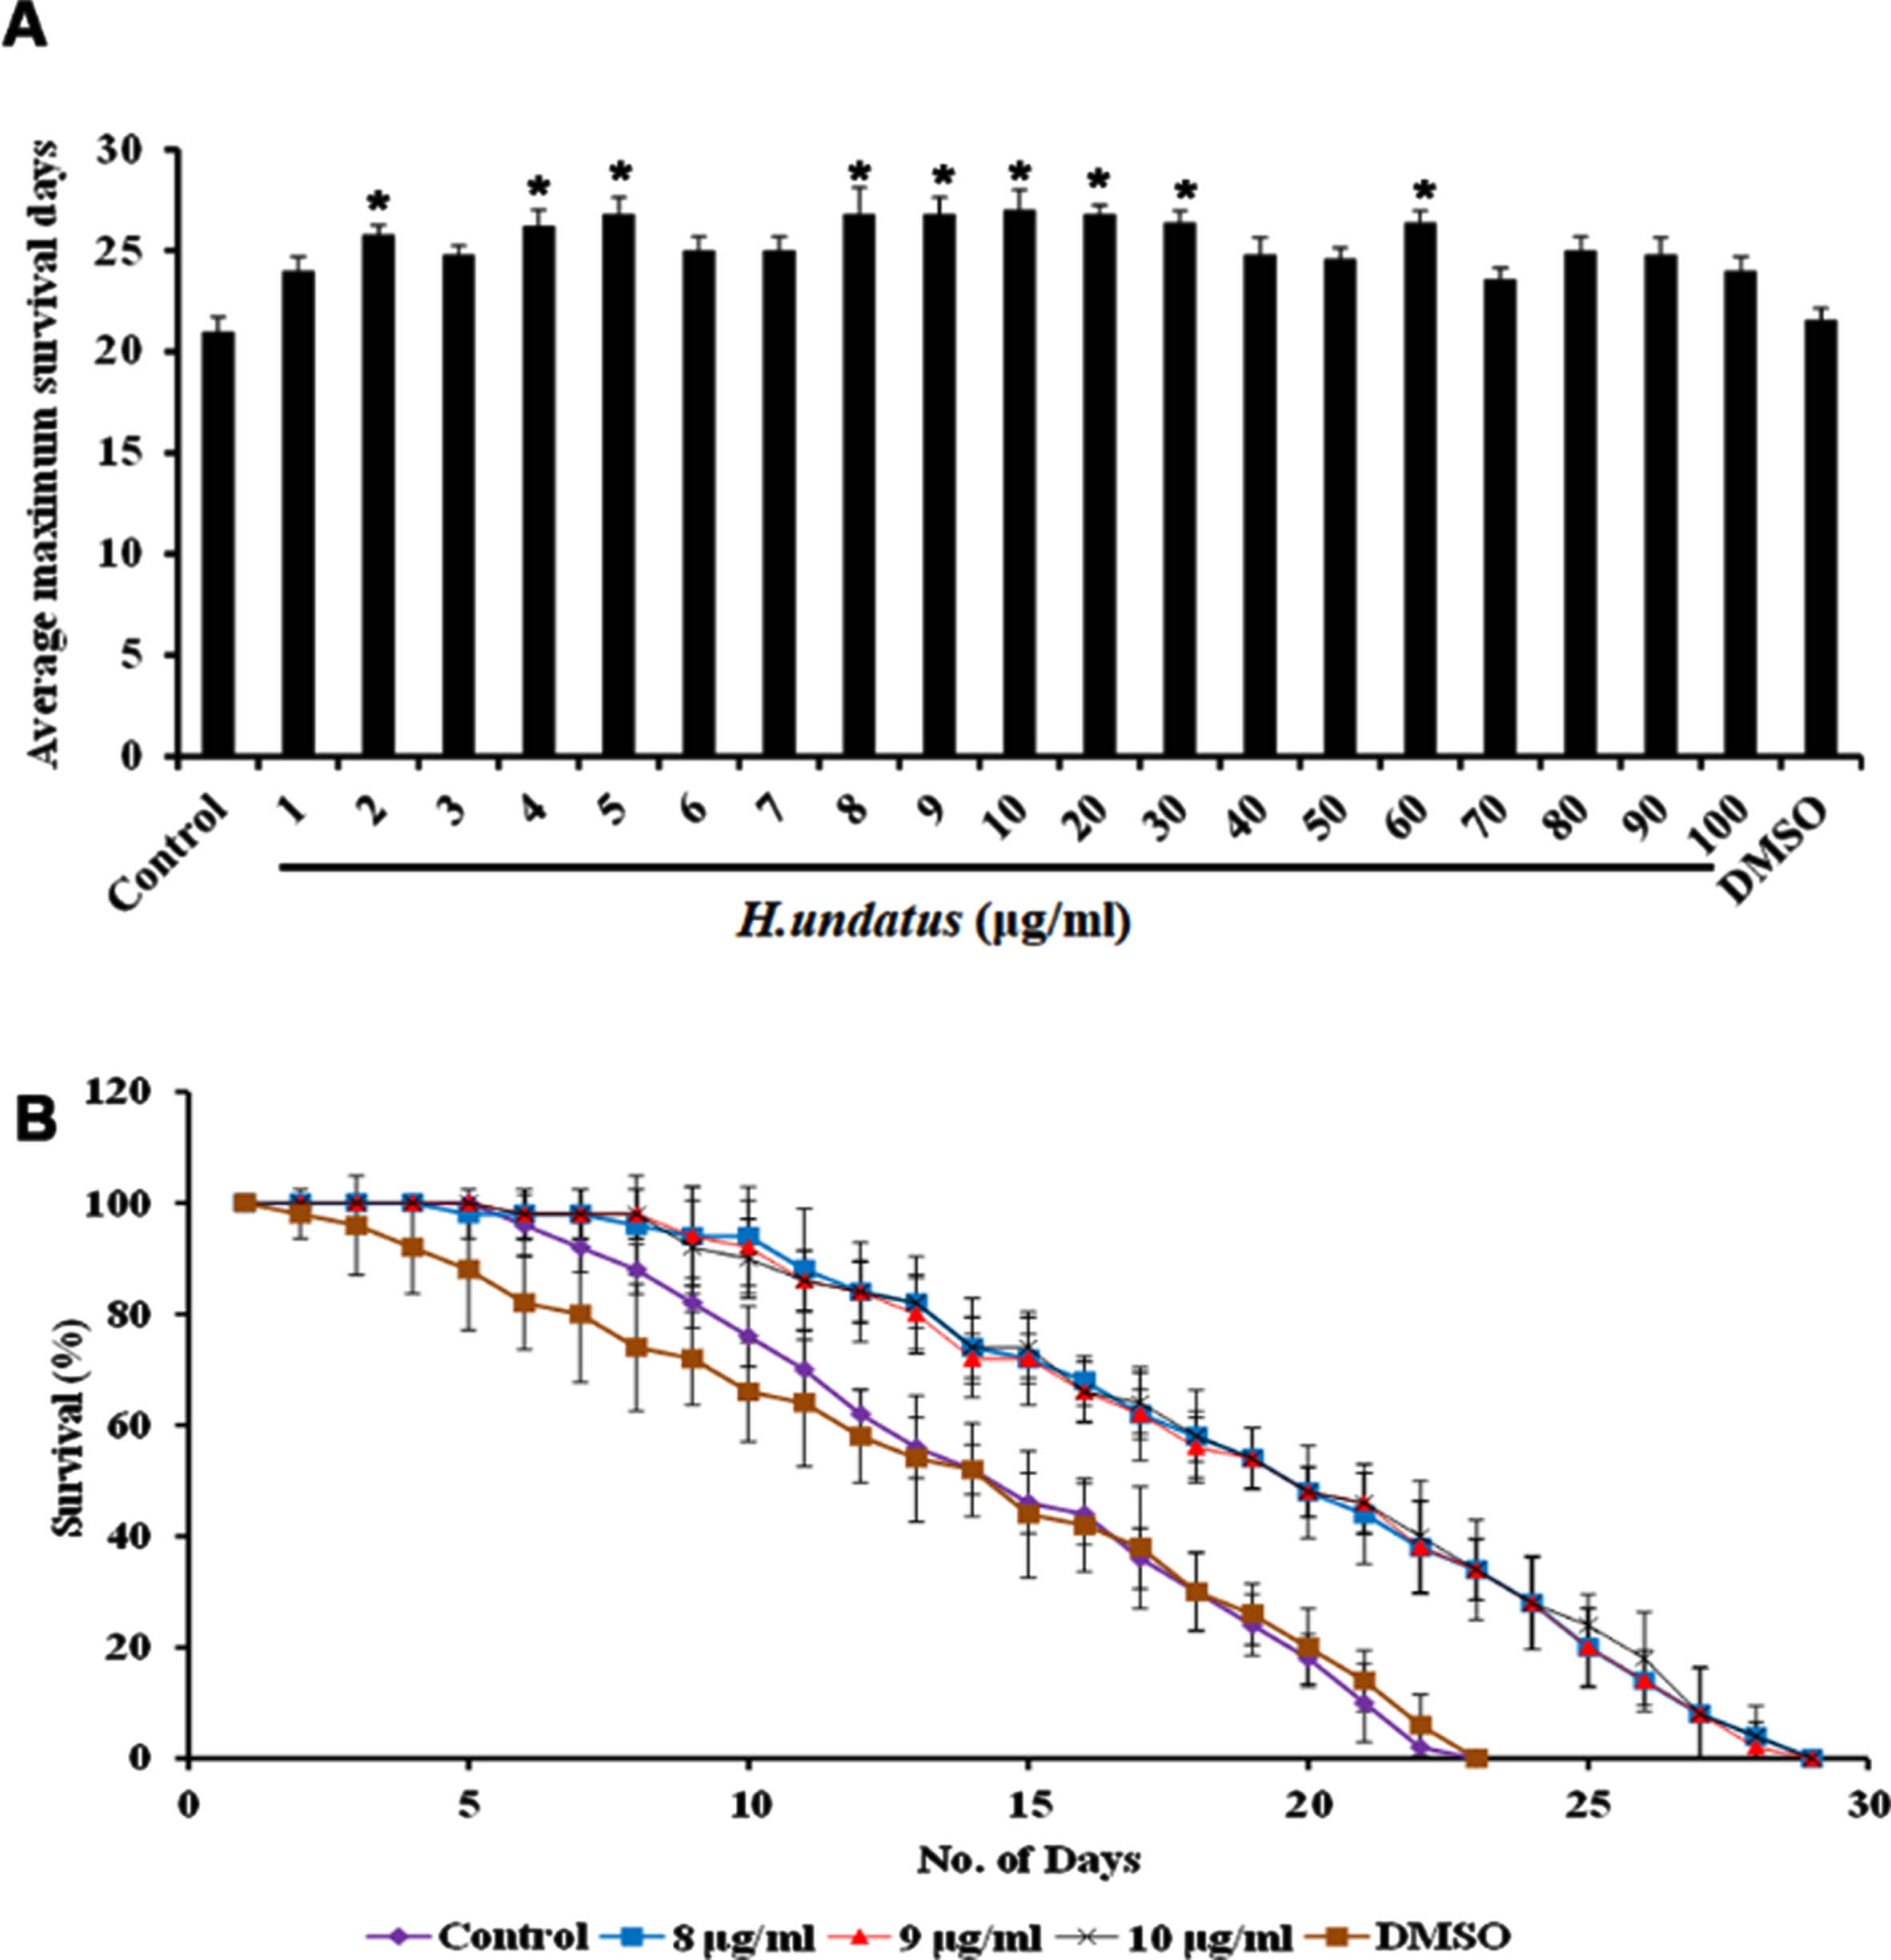 H. undatus extract could extend the maximum lifespan in C. elegans. (A) Average maximum survival rate of the extract (1 –100μg/ml) in N2 worms (B) H. undatus extract (8 –10μg/ml) significantly (p < 0.05) prolonged the lifespan of nematodes to 28, 28 and 28 days respectively.